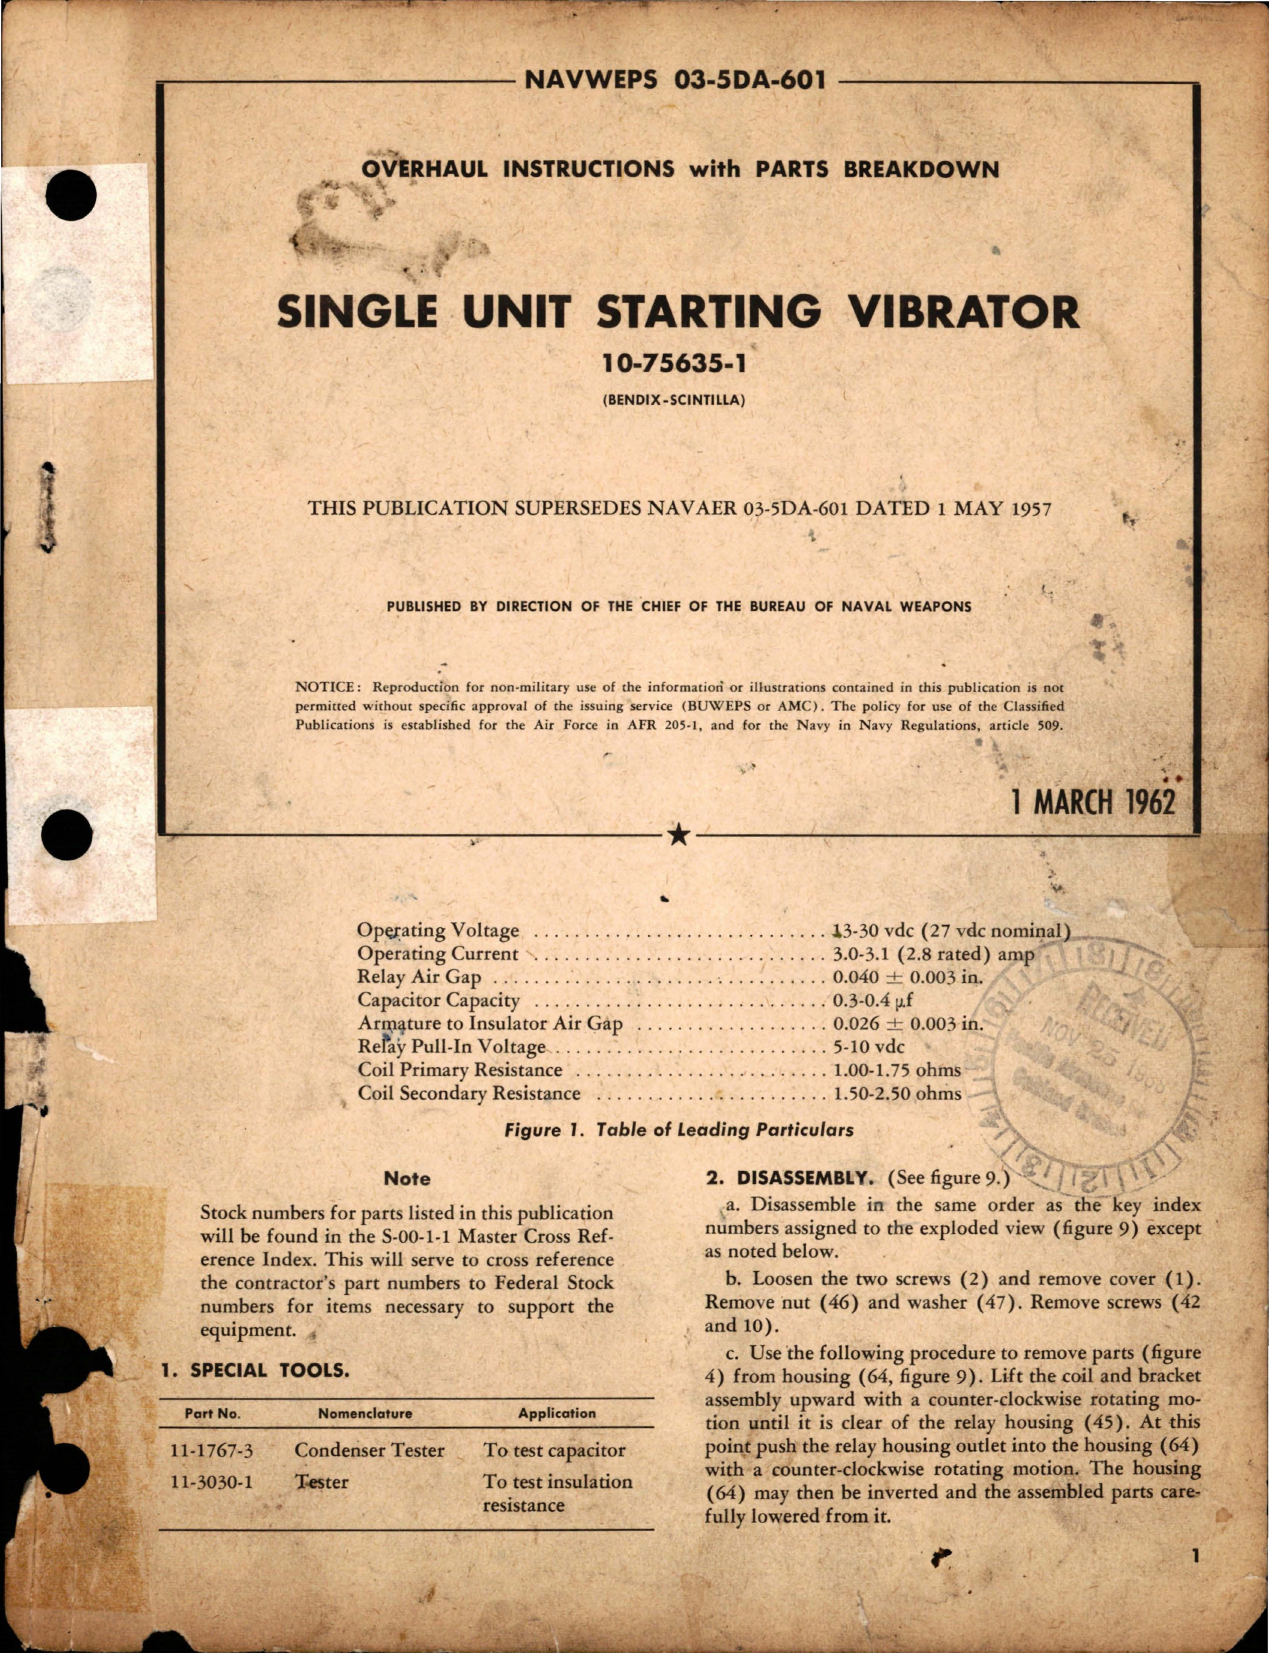 Sample page 1 from AirCorps Library document: Overhaul Instructions with Parts Breakdown for Single Unit Starting Vibrator - 1075635-1